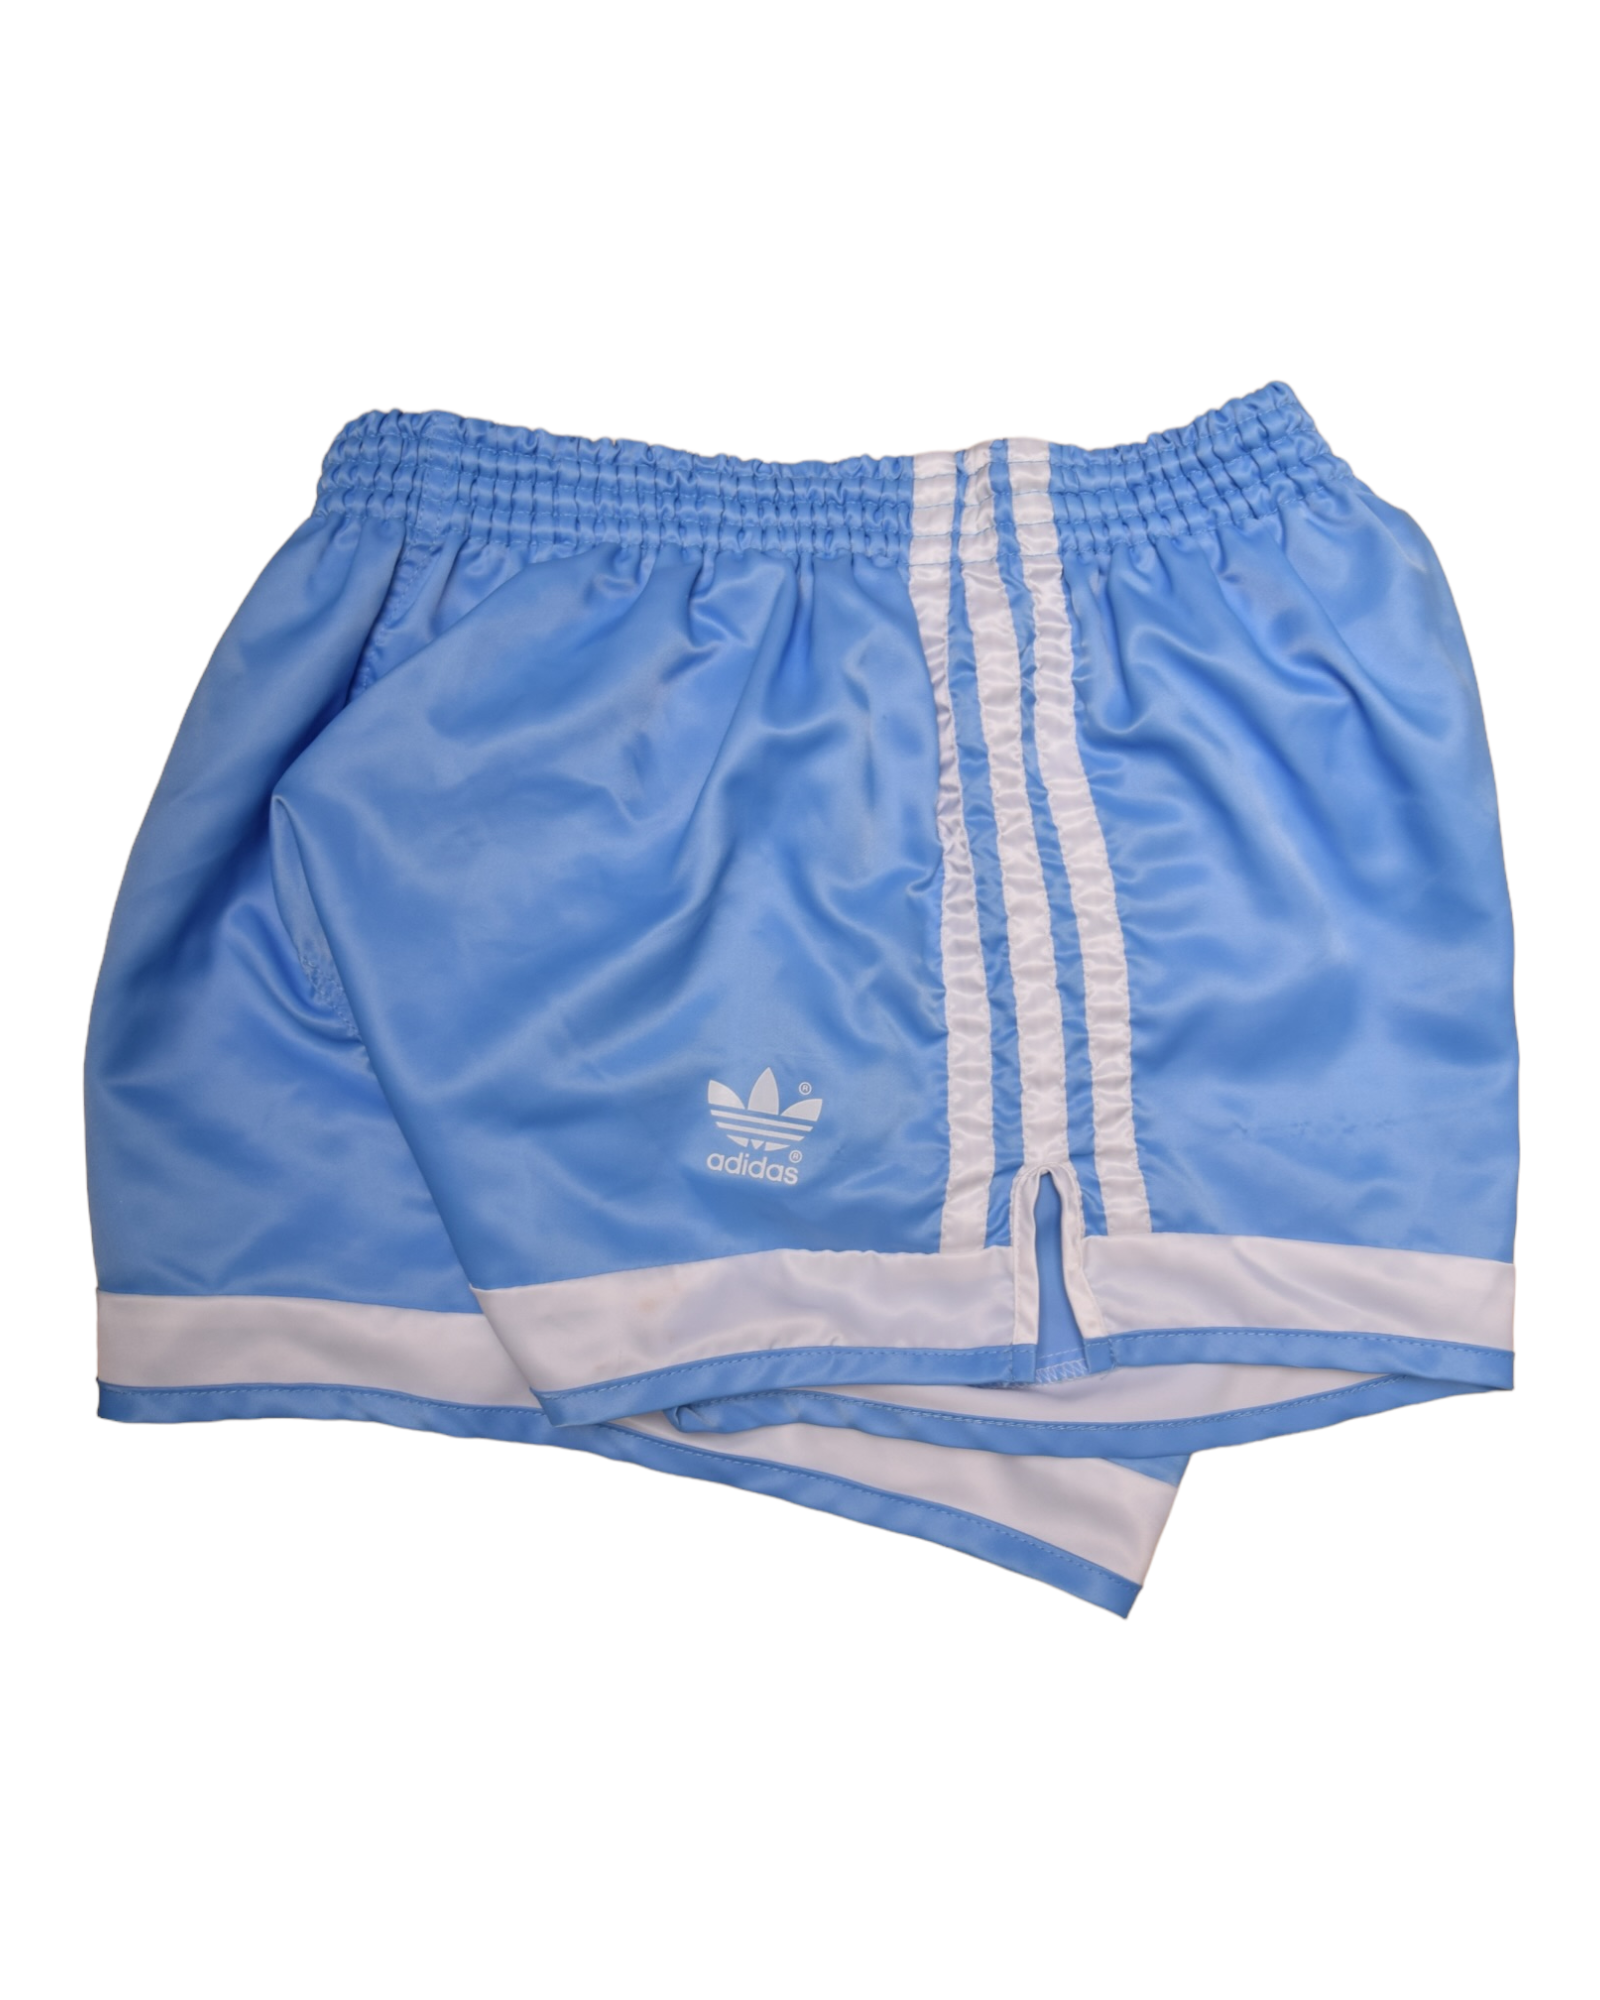 Vintage 80's Adidas Festival Shorts Blue Made in West Germany 